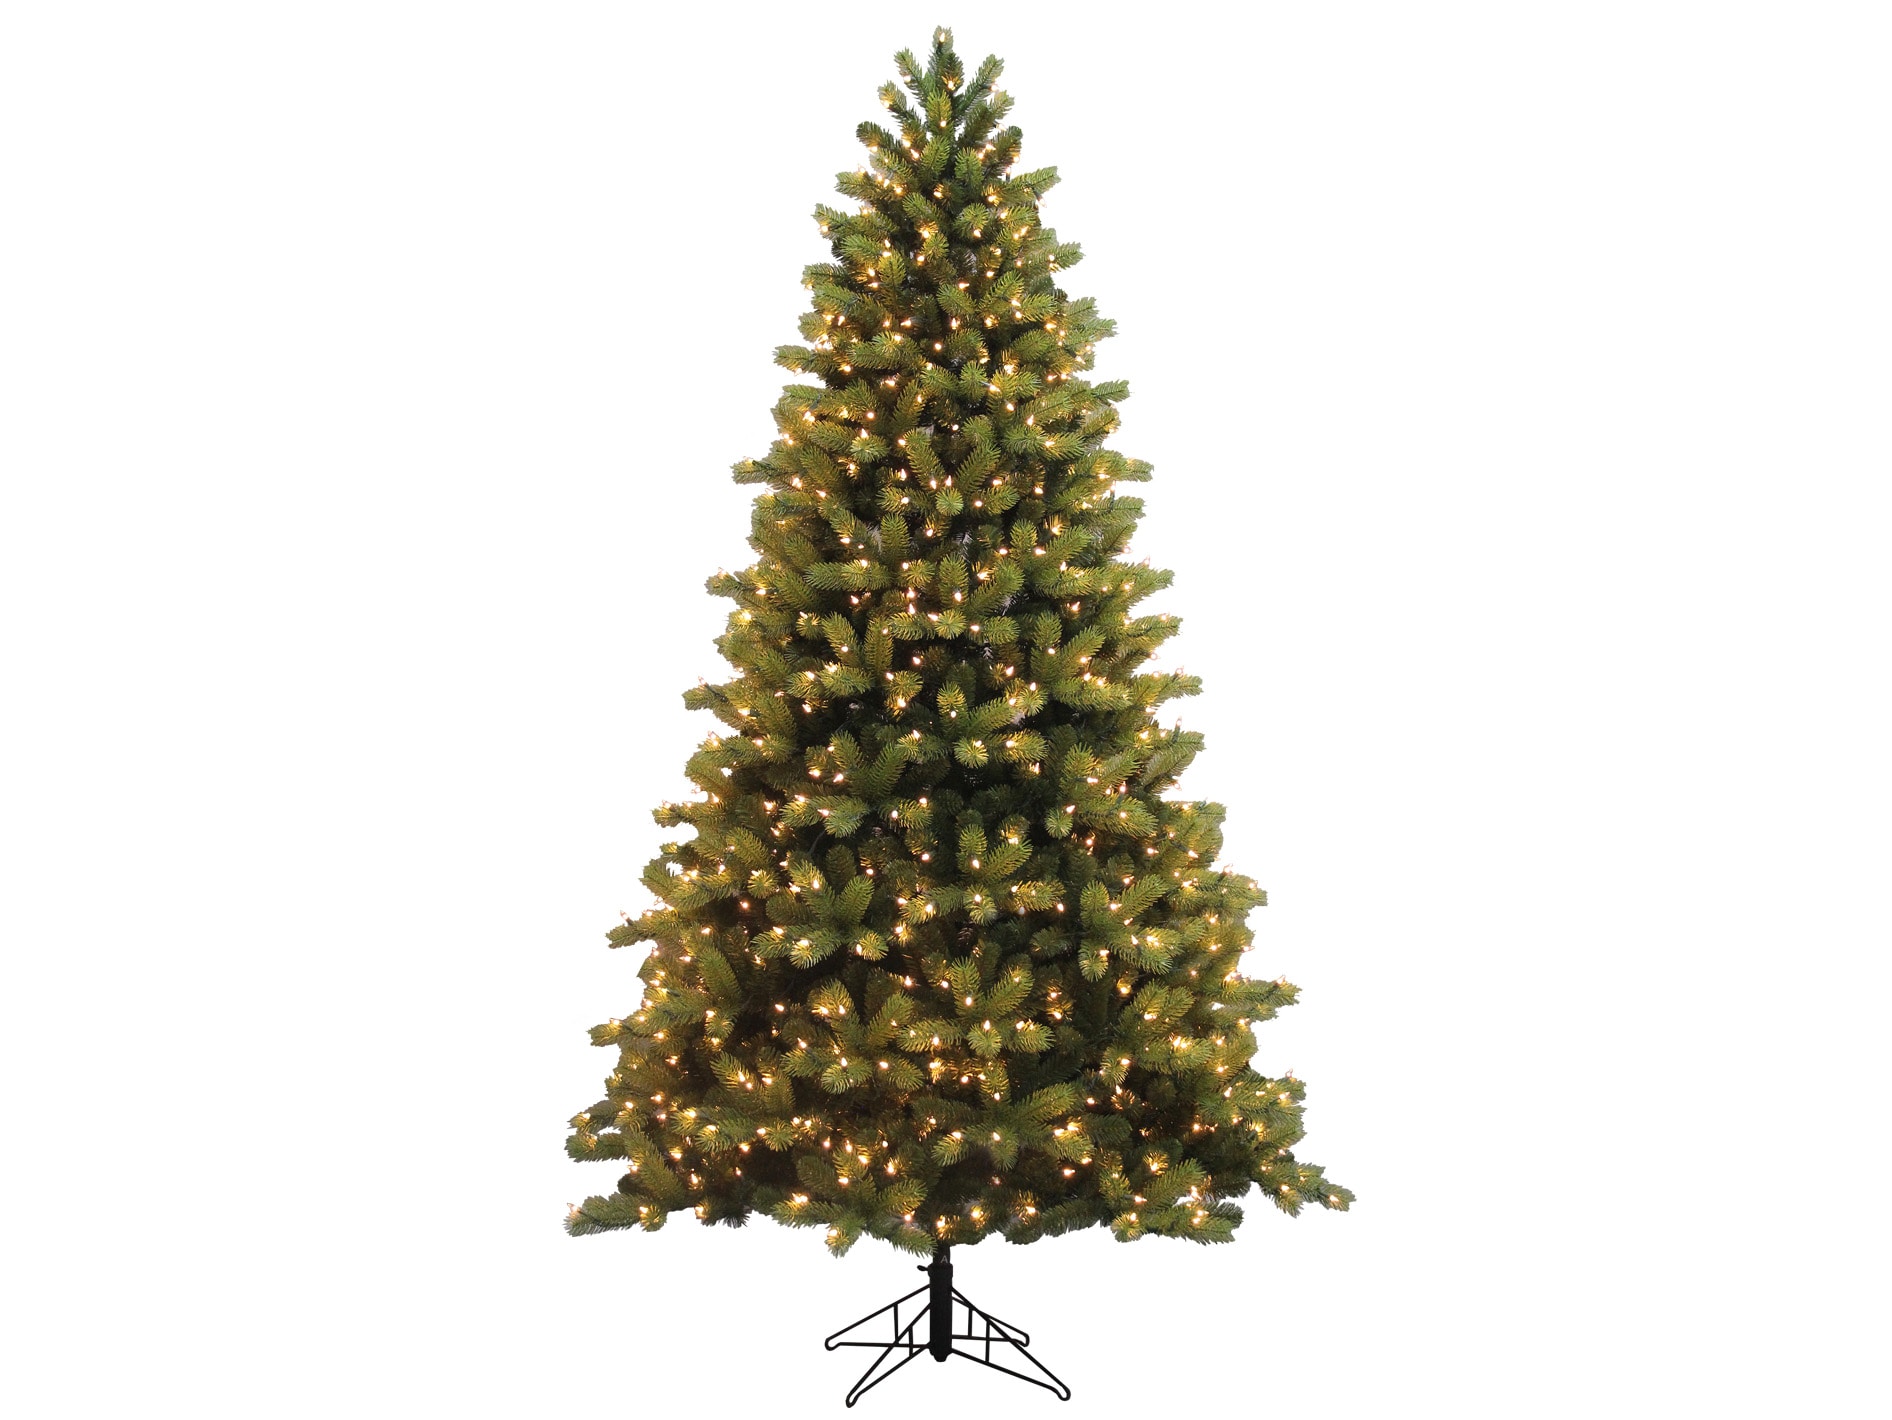 2 Ft Christmas Tree Noble Fir Green Artificial Clear Lights Holiday Time Pre Lit 